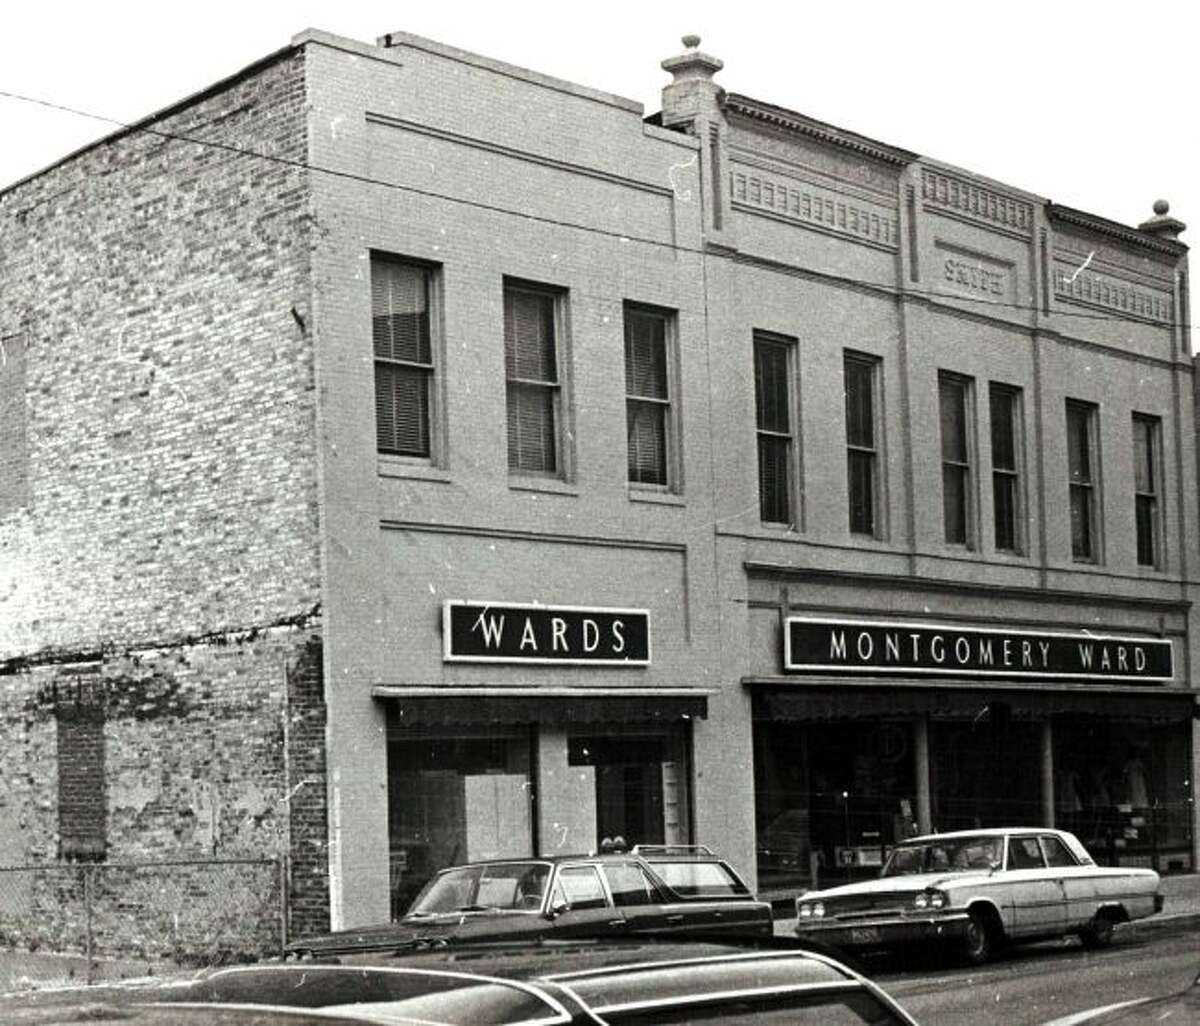 The Montgomery Ward Store in downtown Manistee is shown in this photograph from the 1960s.